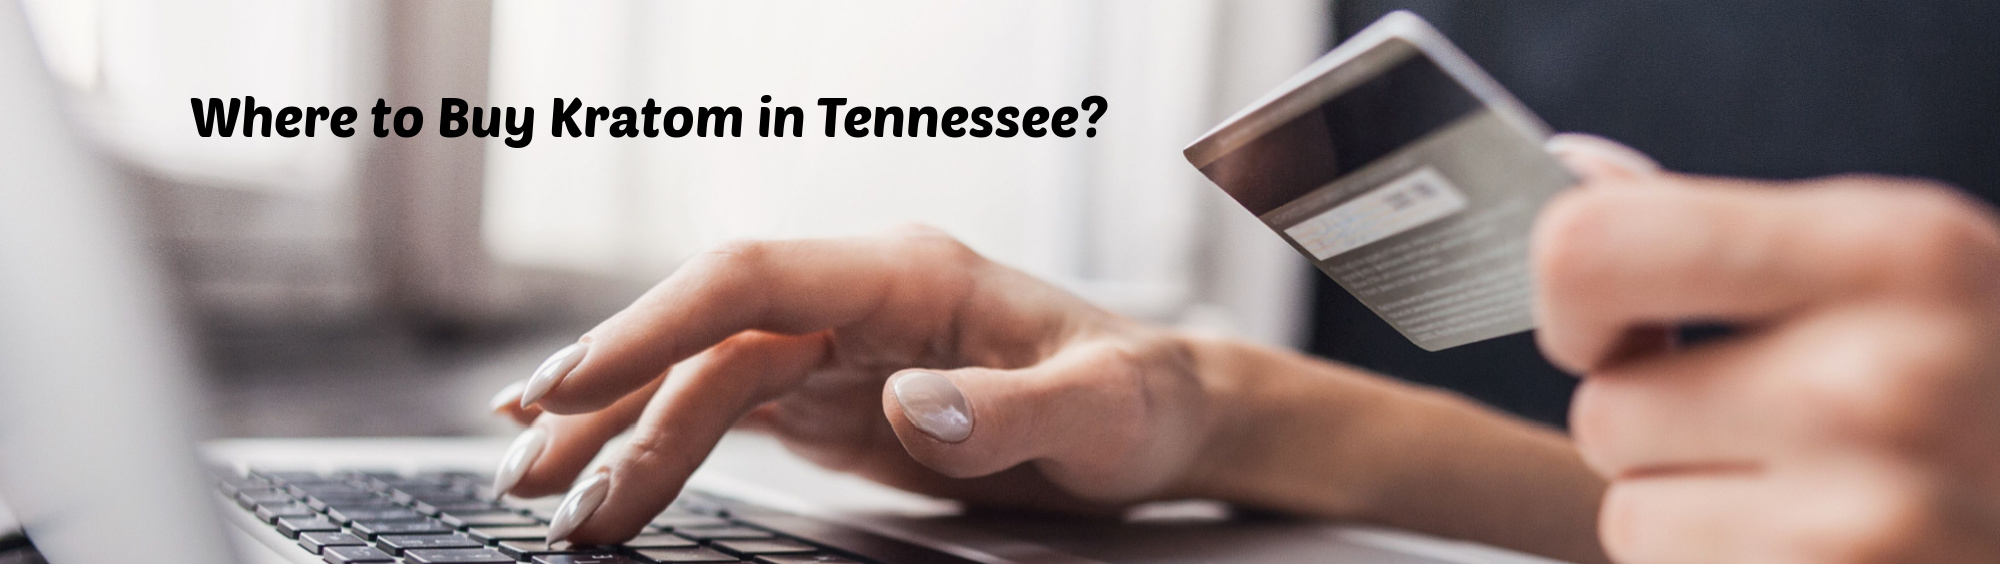 image of where to buy kratom in tennessee